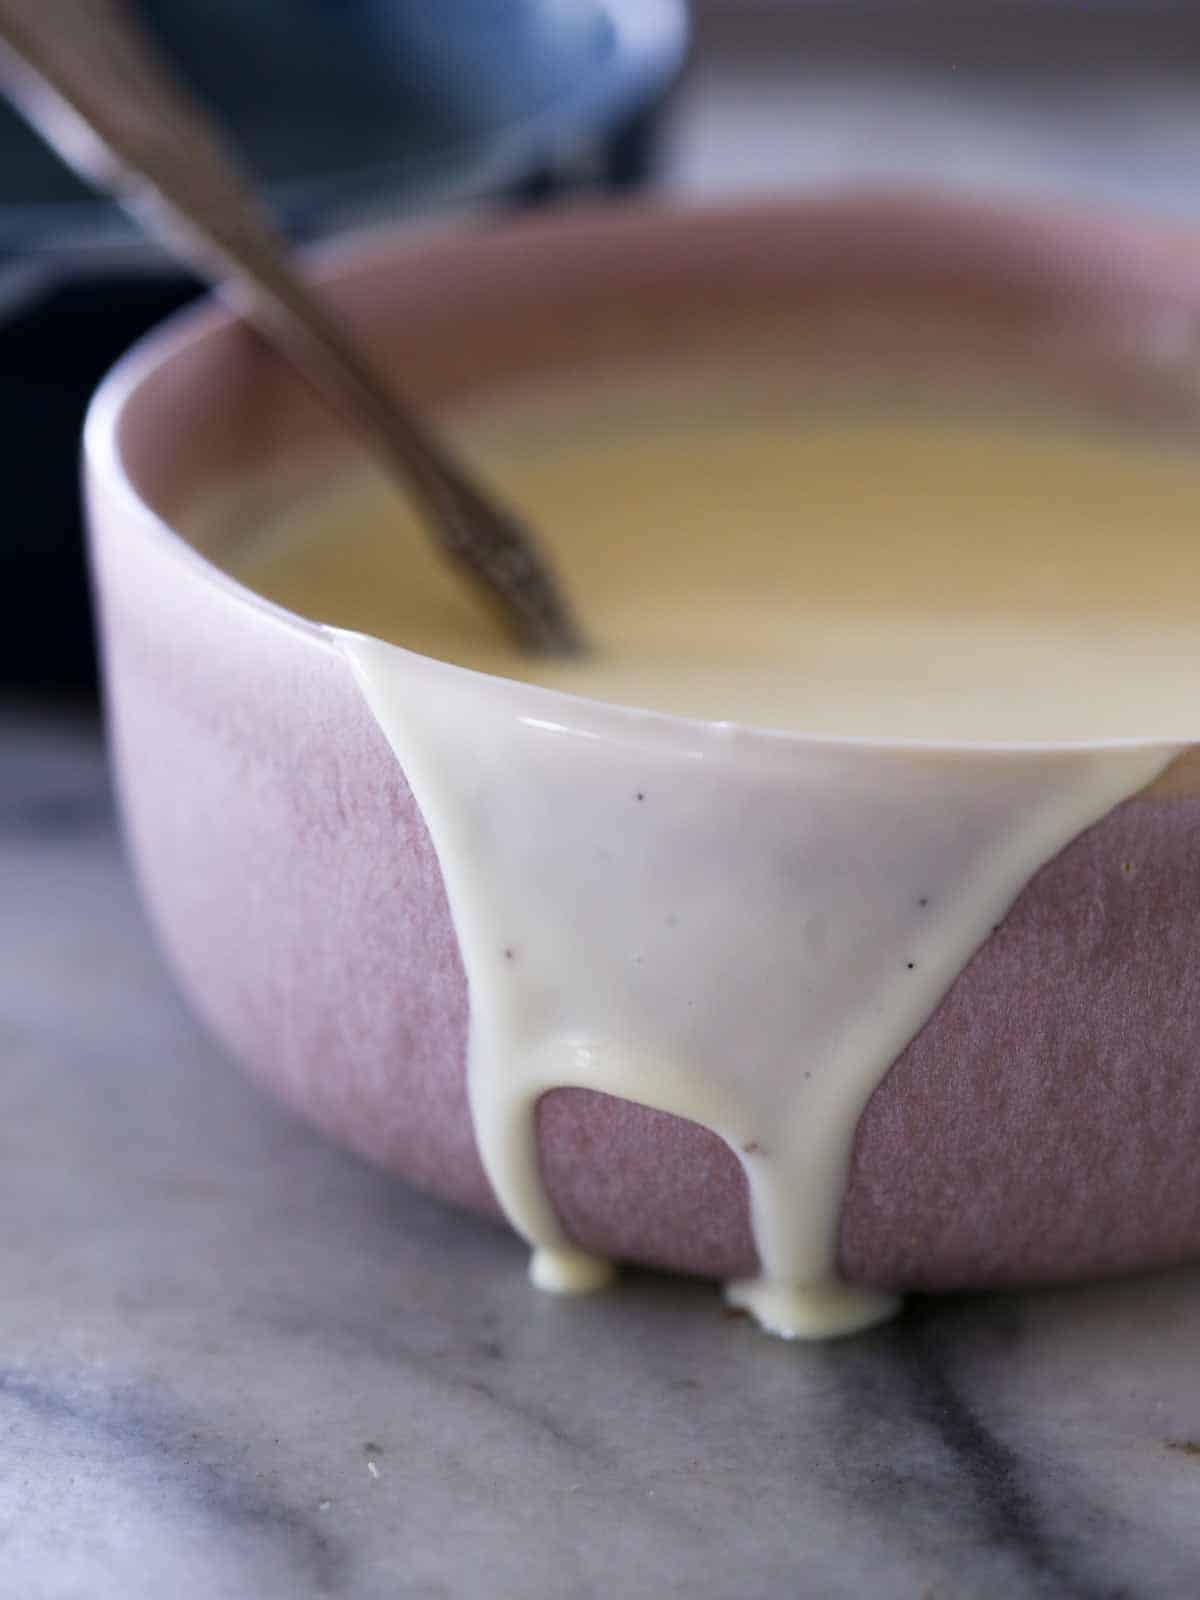 creme anglaise dripping down side of pink bowl.